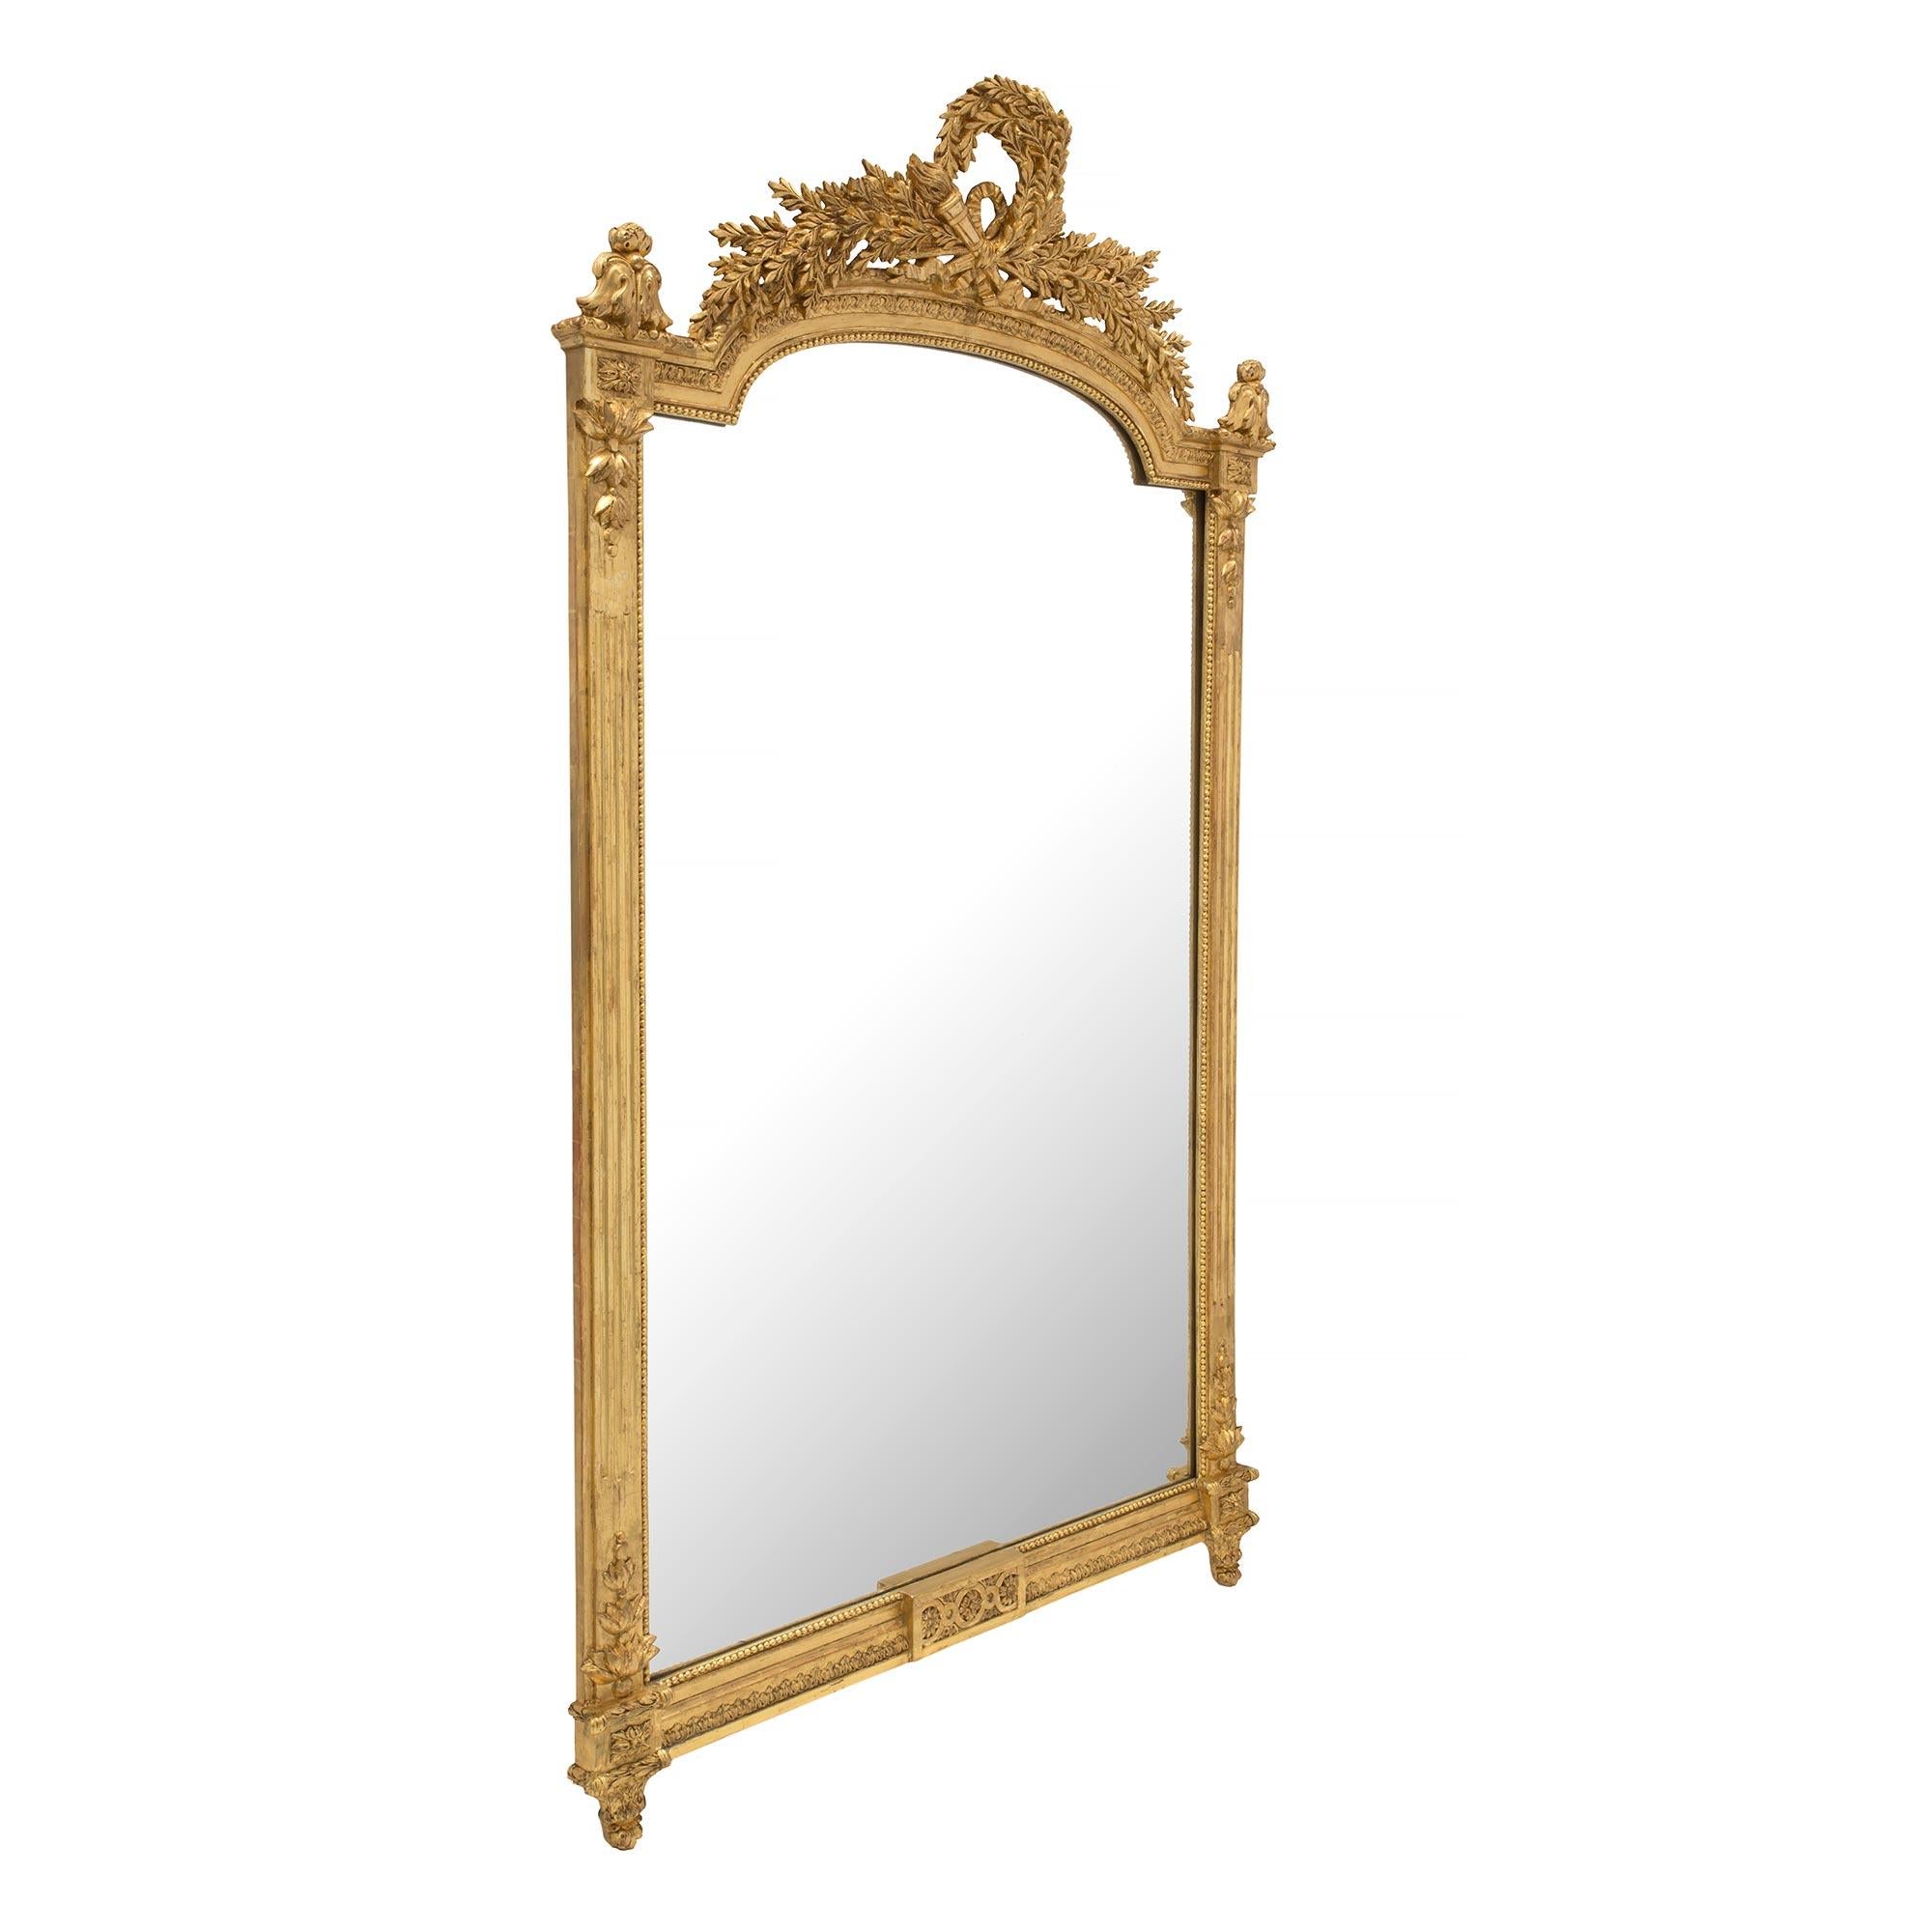 A most elegant French 19th century Louis XVI st. giltwood mirror. The original mirror plate is framed within a beaded giltwood border with Fine flutes along each side. Each corner displays Fine block rosettes with beautiful floral finials and